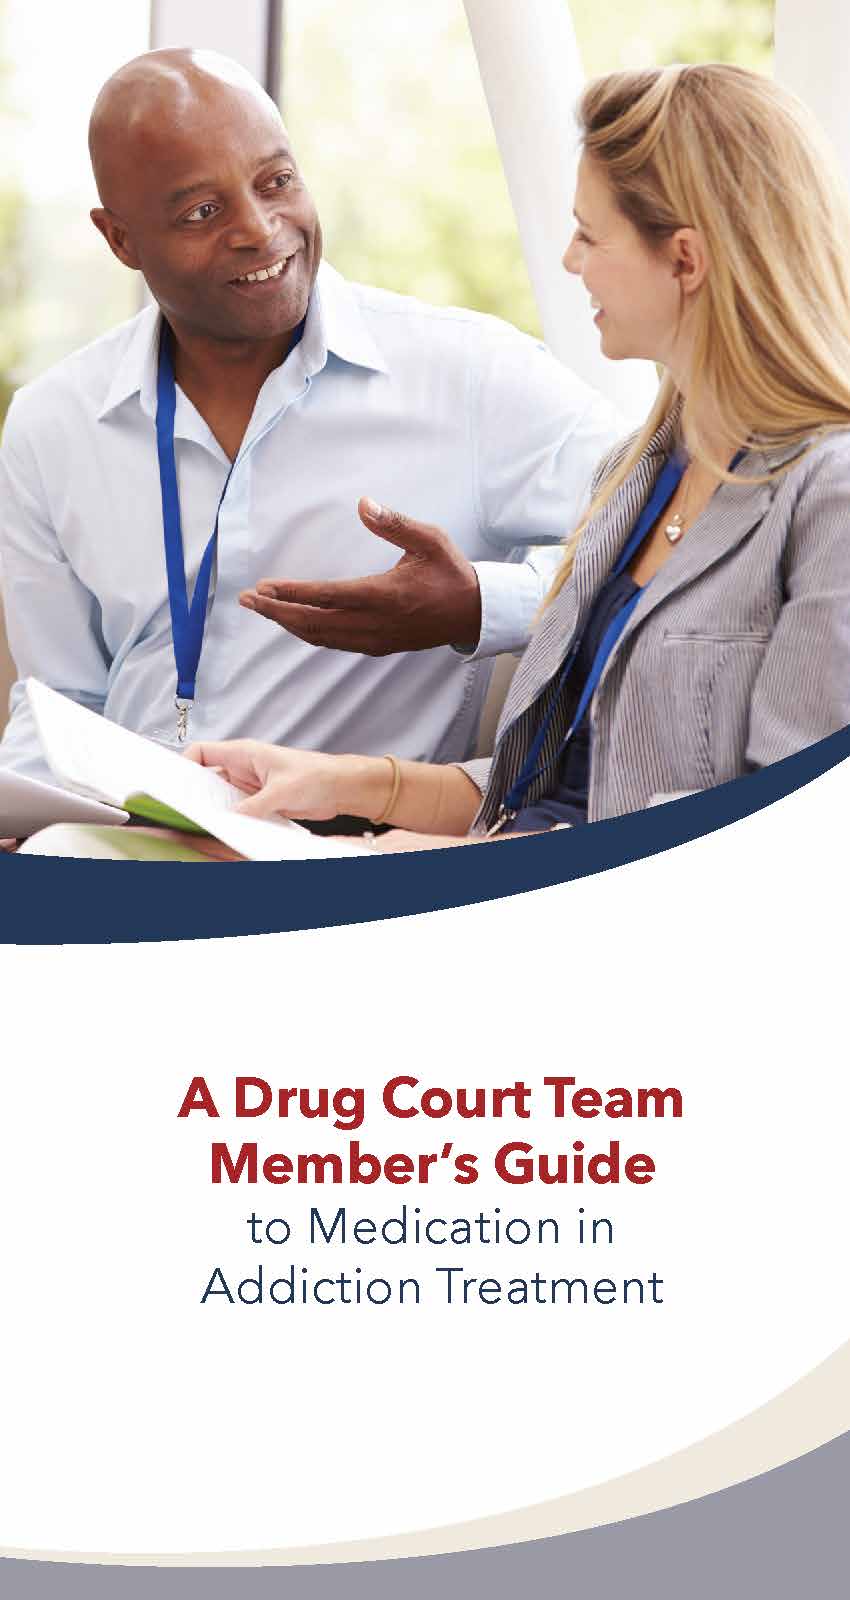 A Drug Court Team Member's Guide to Medication in Addiction Treatment